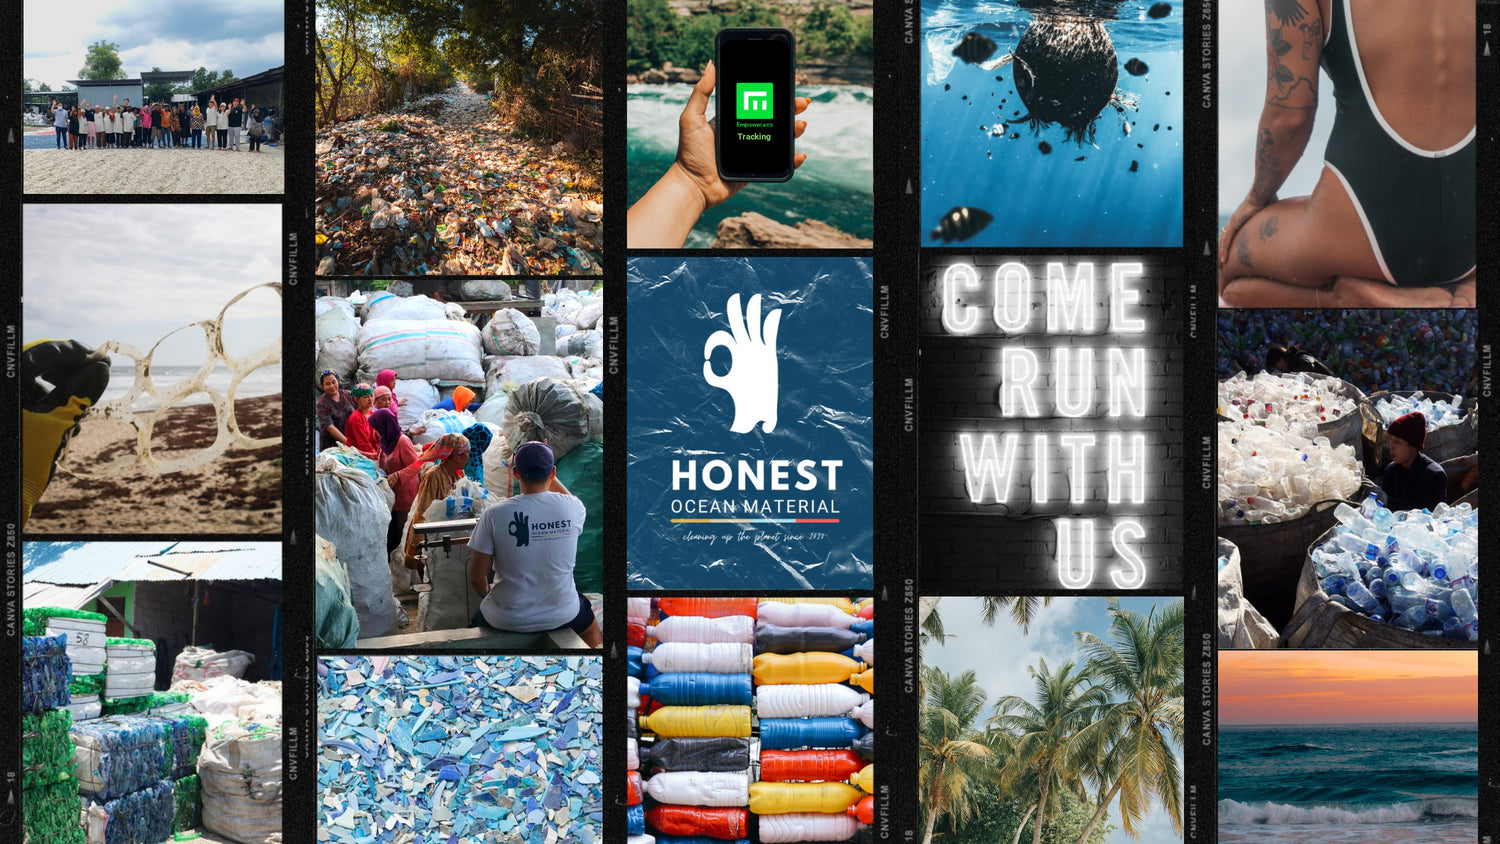 Honest Ocean Material - Plastic Waste Collection - Recycled Plastic Pellets - Community Collection across Indonesia